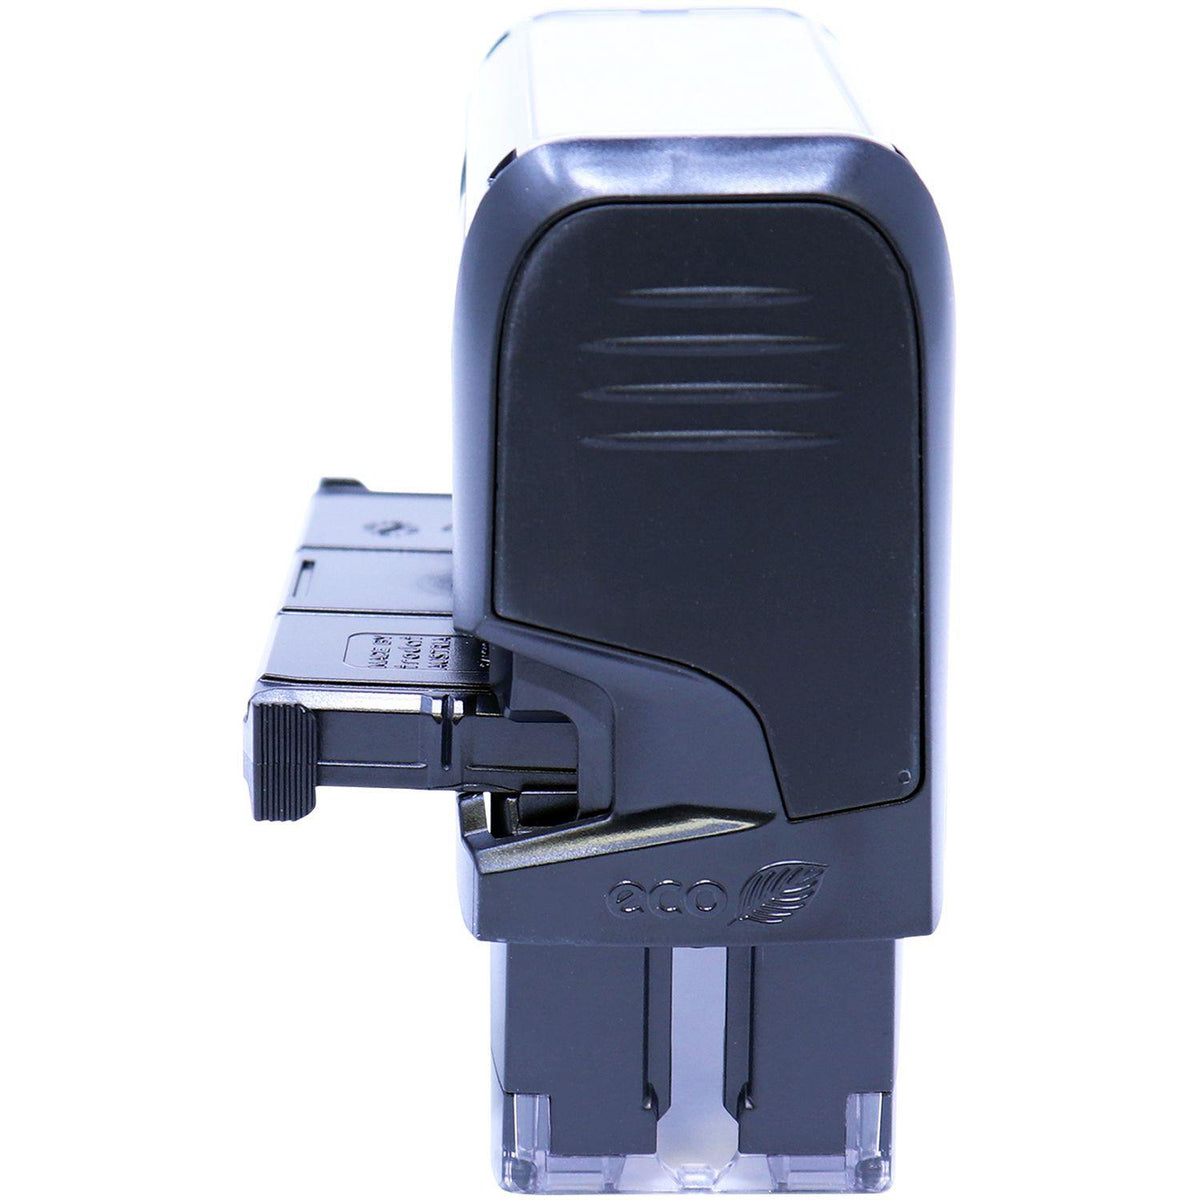 Self Inking Closed Stamp - Engineer Seal Stamps - Brand_Trodat, Impression Size_Small, Stamp Type_Self-Inking Stamp, Type of Use_Office